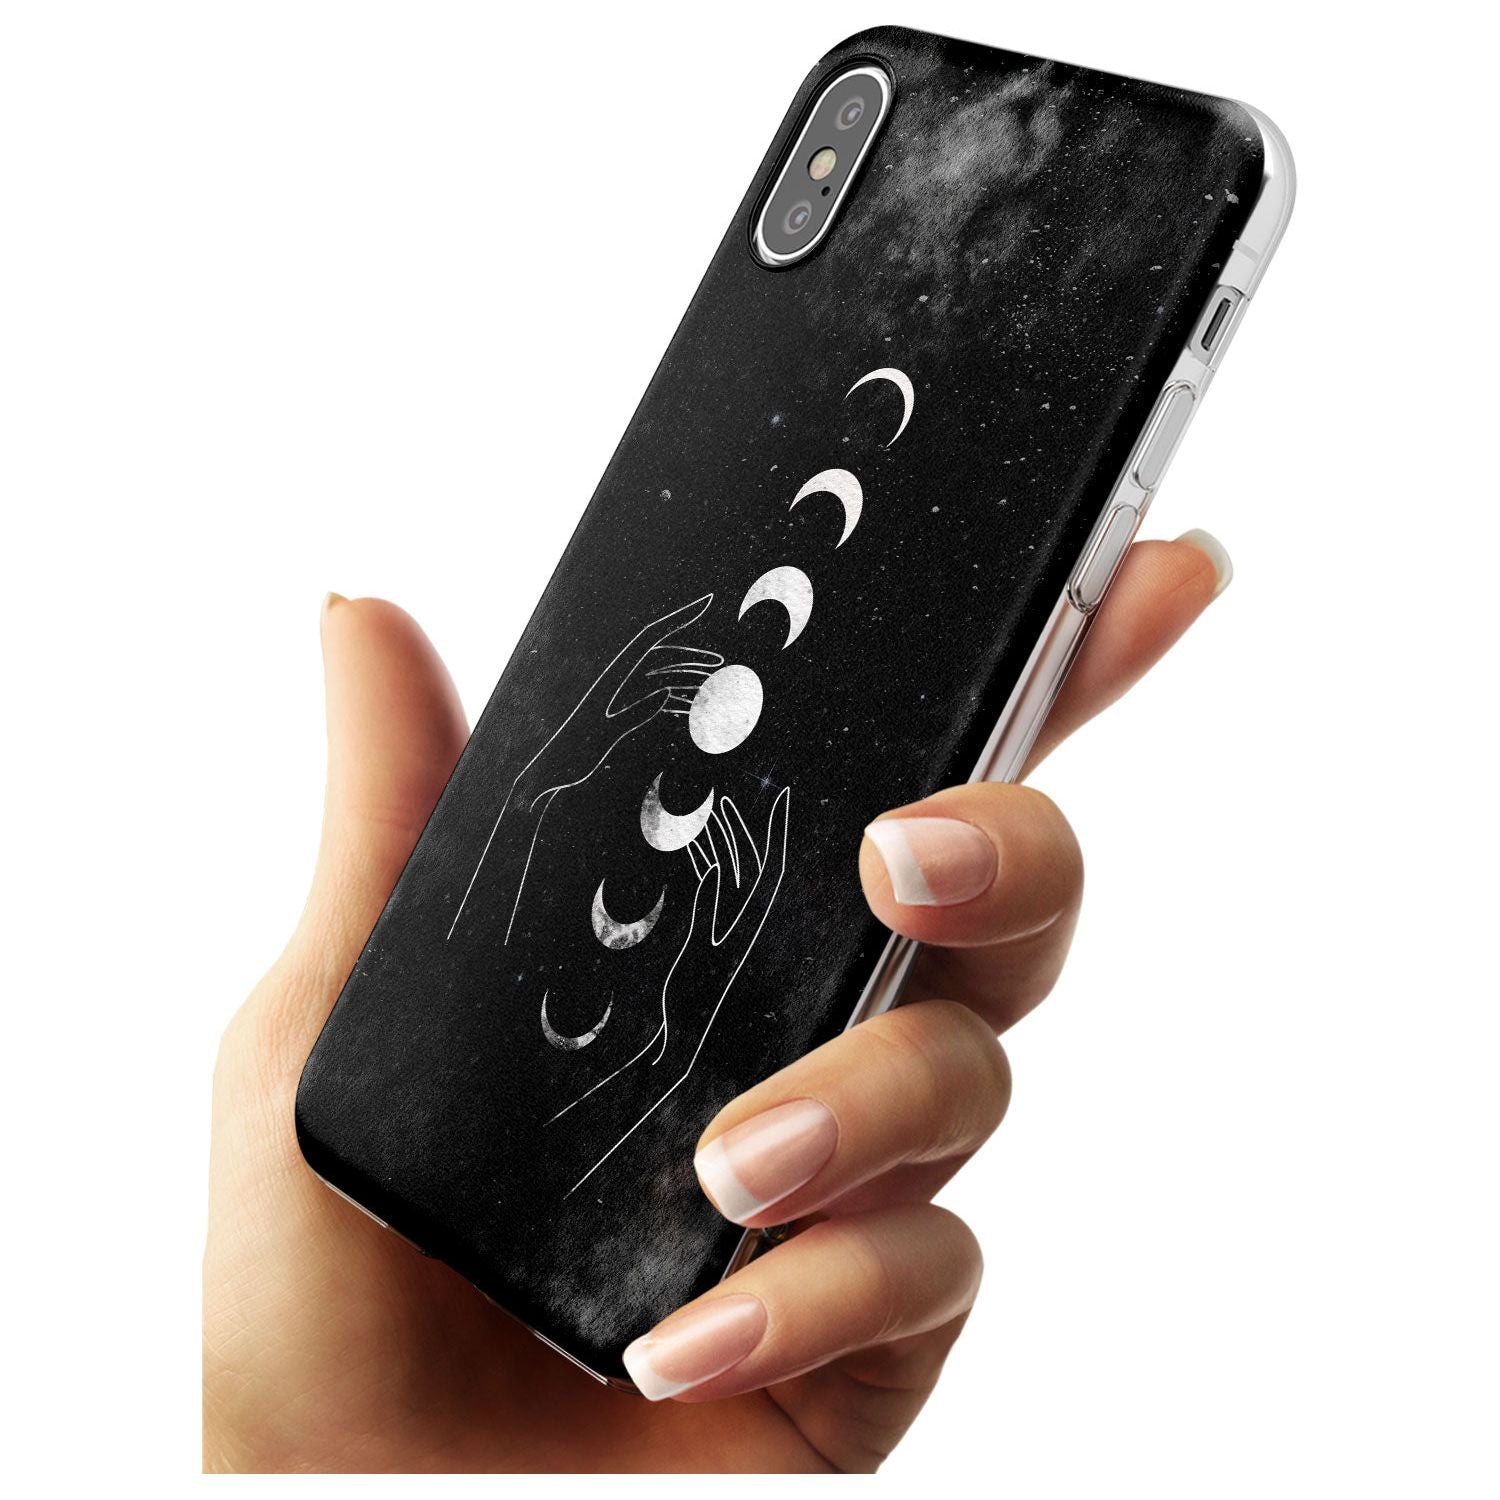 Moon Phases and Hands Slim TPU Phone Case Warehouse X XS Max XR